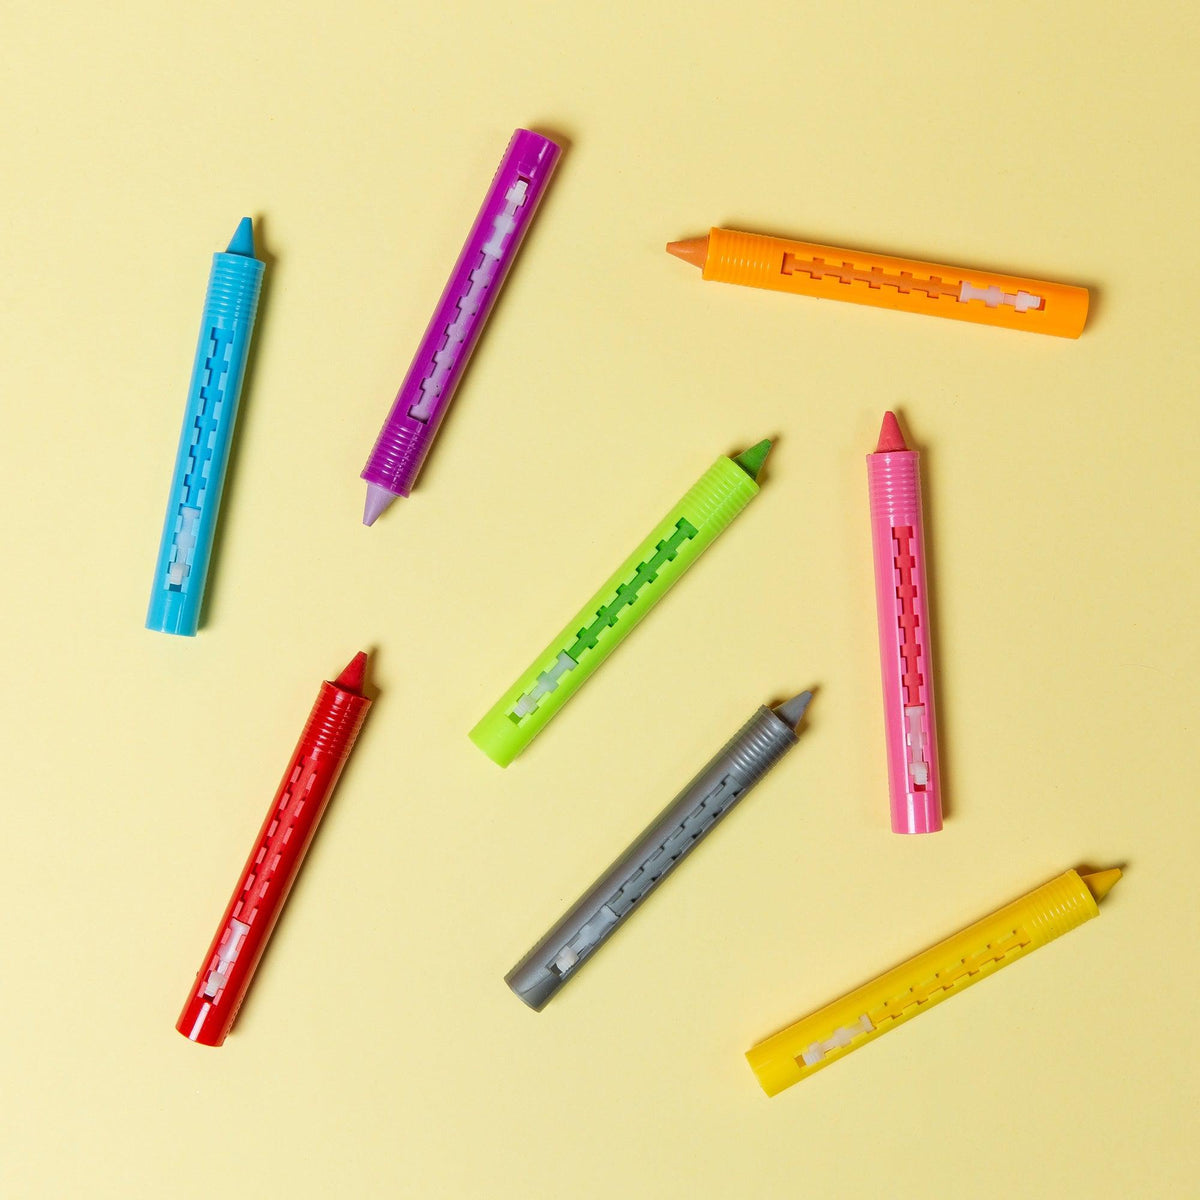 Front view of scattered bath crayons on yellow background showing colors blue, purple, orange, pink, green, red, silver, and yellow.